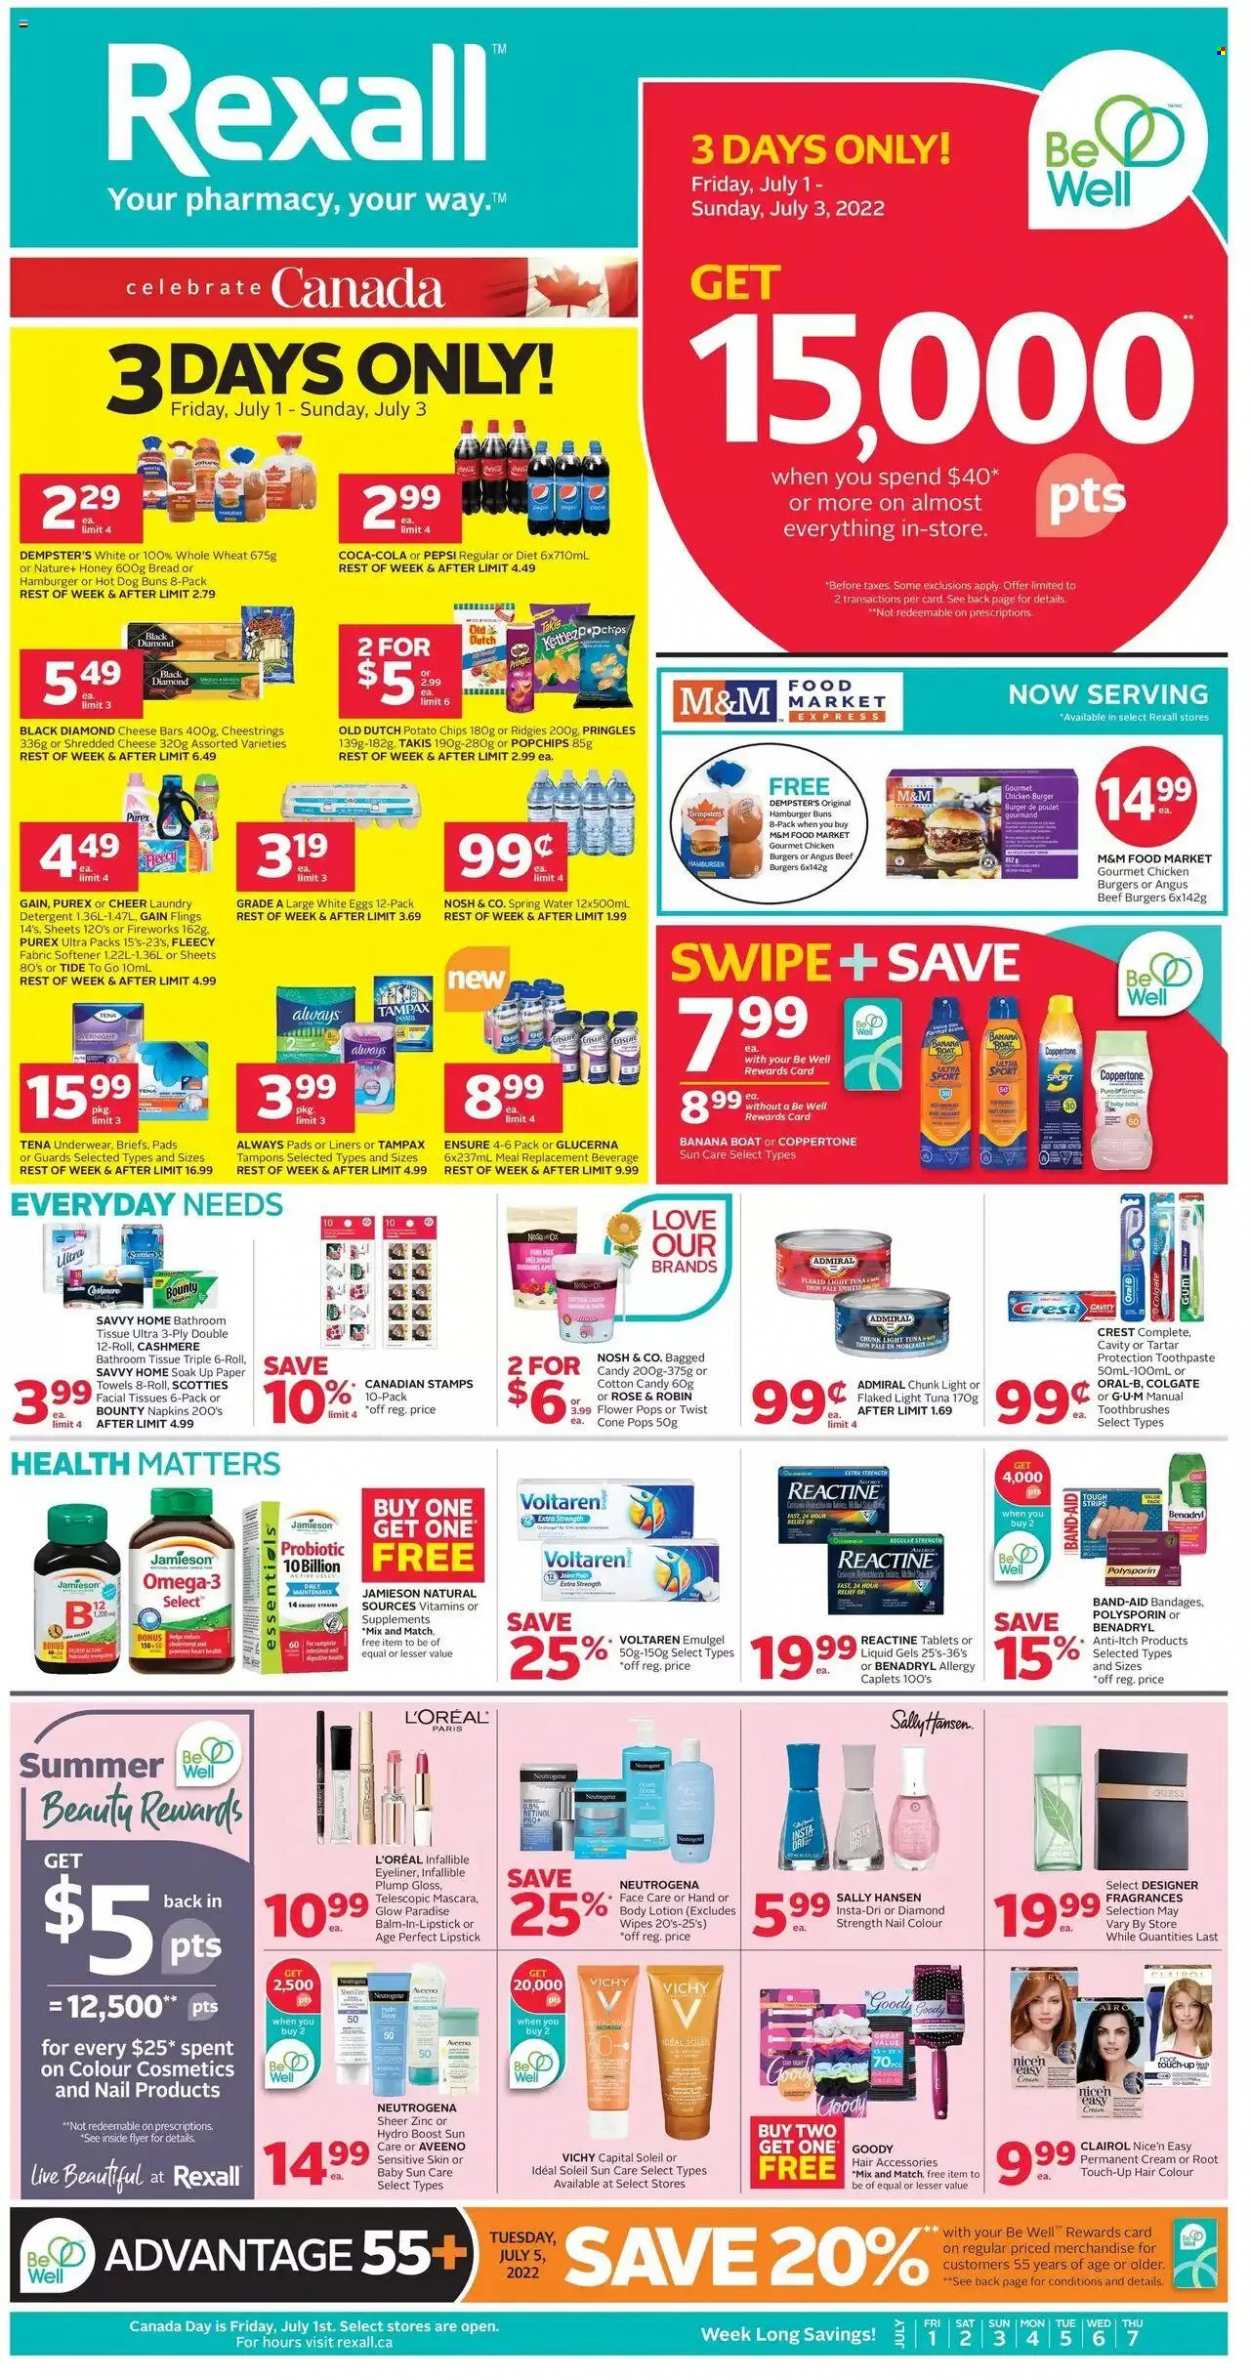 thumbnail - Rexall Flyer - July 01, 2022 - July 07, 2022 - Sales products - bread, buns, burger buns, eggs, strips, Bounty, cotton candy, potato chips, Pringles, chips, tuna, light tuna, honey, Coca-Cola, Pepsi, spring water, Boost, rosé wine, wipes, napkins, Aveeno, bath tissue, kitchen towels, paper towels, Gain, Tide, fabric softener, laundry detergent, Purex, Vichy, toothpaste, Crest, Always pads, sanitary pads, tampons, L’Oréal, Root Touch-Up, Clairol, hair color, body lotion, lipstick, mascara, eyeliner, Omega-3, Glucerna, zinc, band-aid, detergent, Colgate, Neutrogena, Sally Hansen, Tampax, Oral-B, M&M's. Page 1.